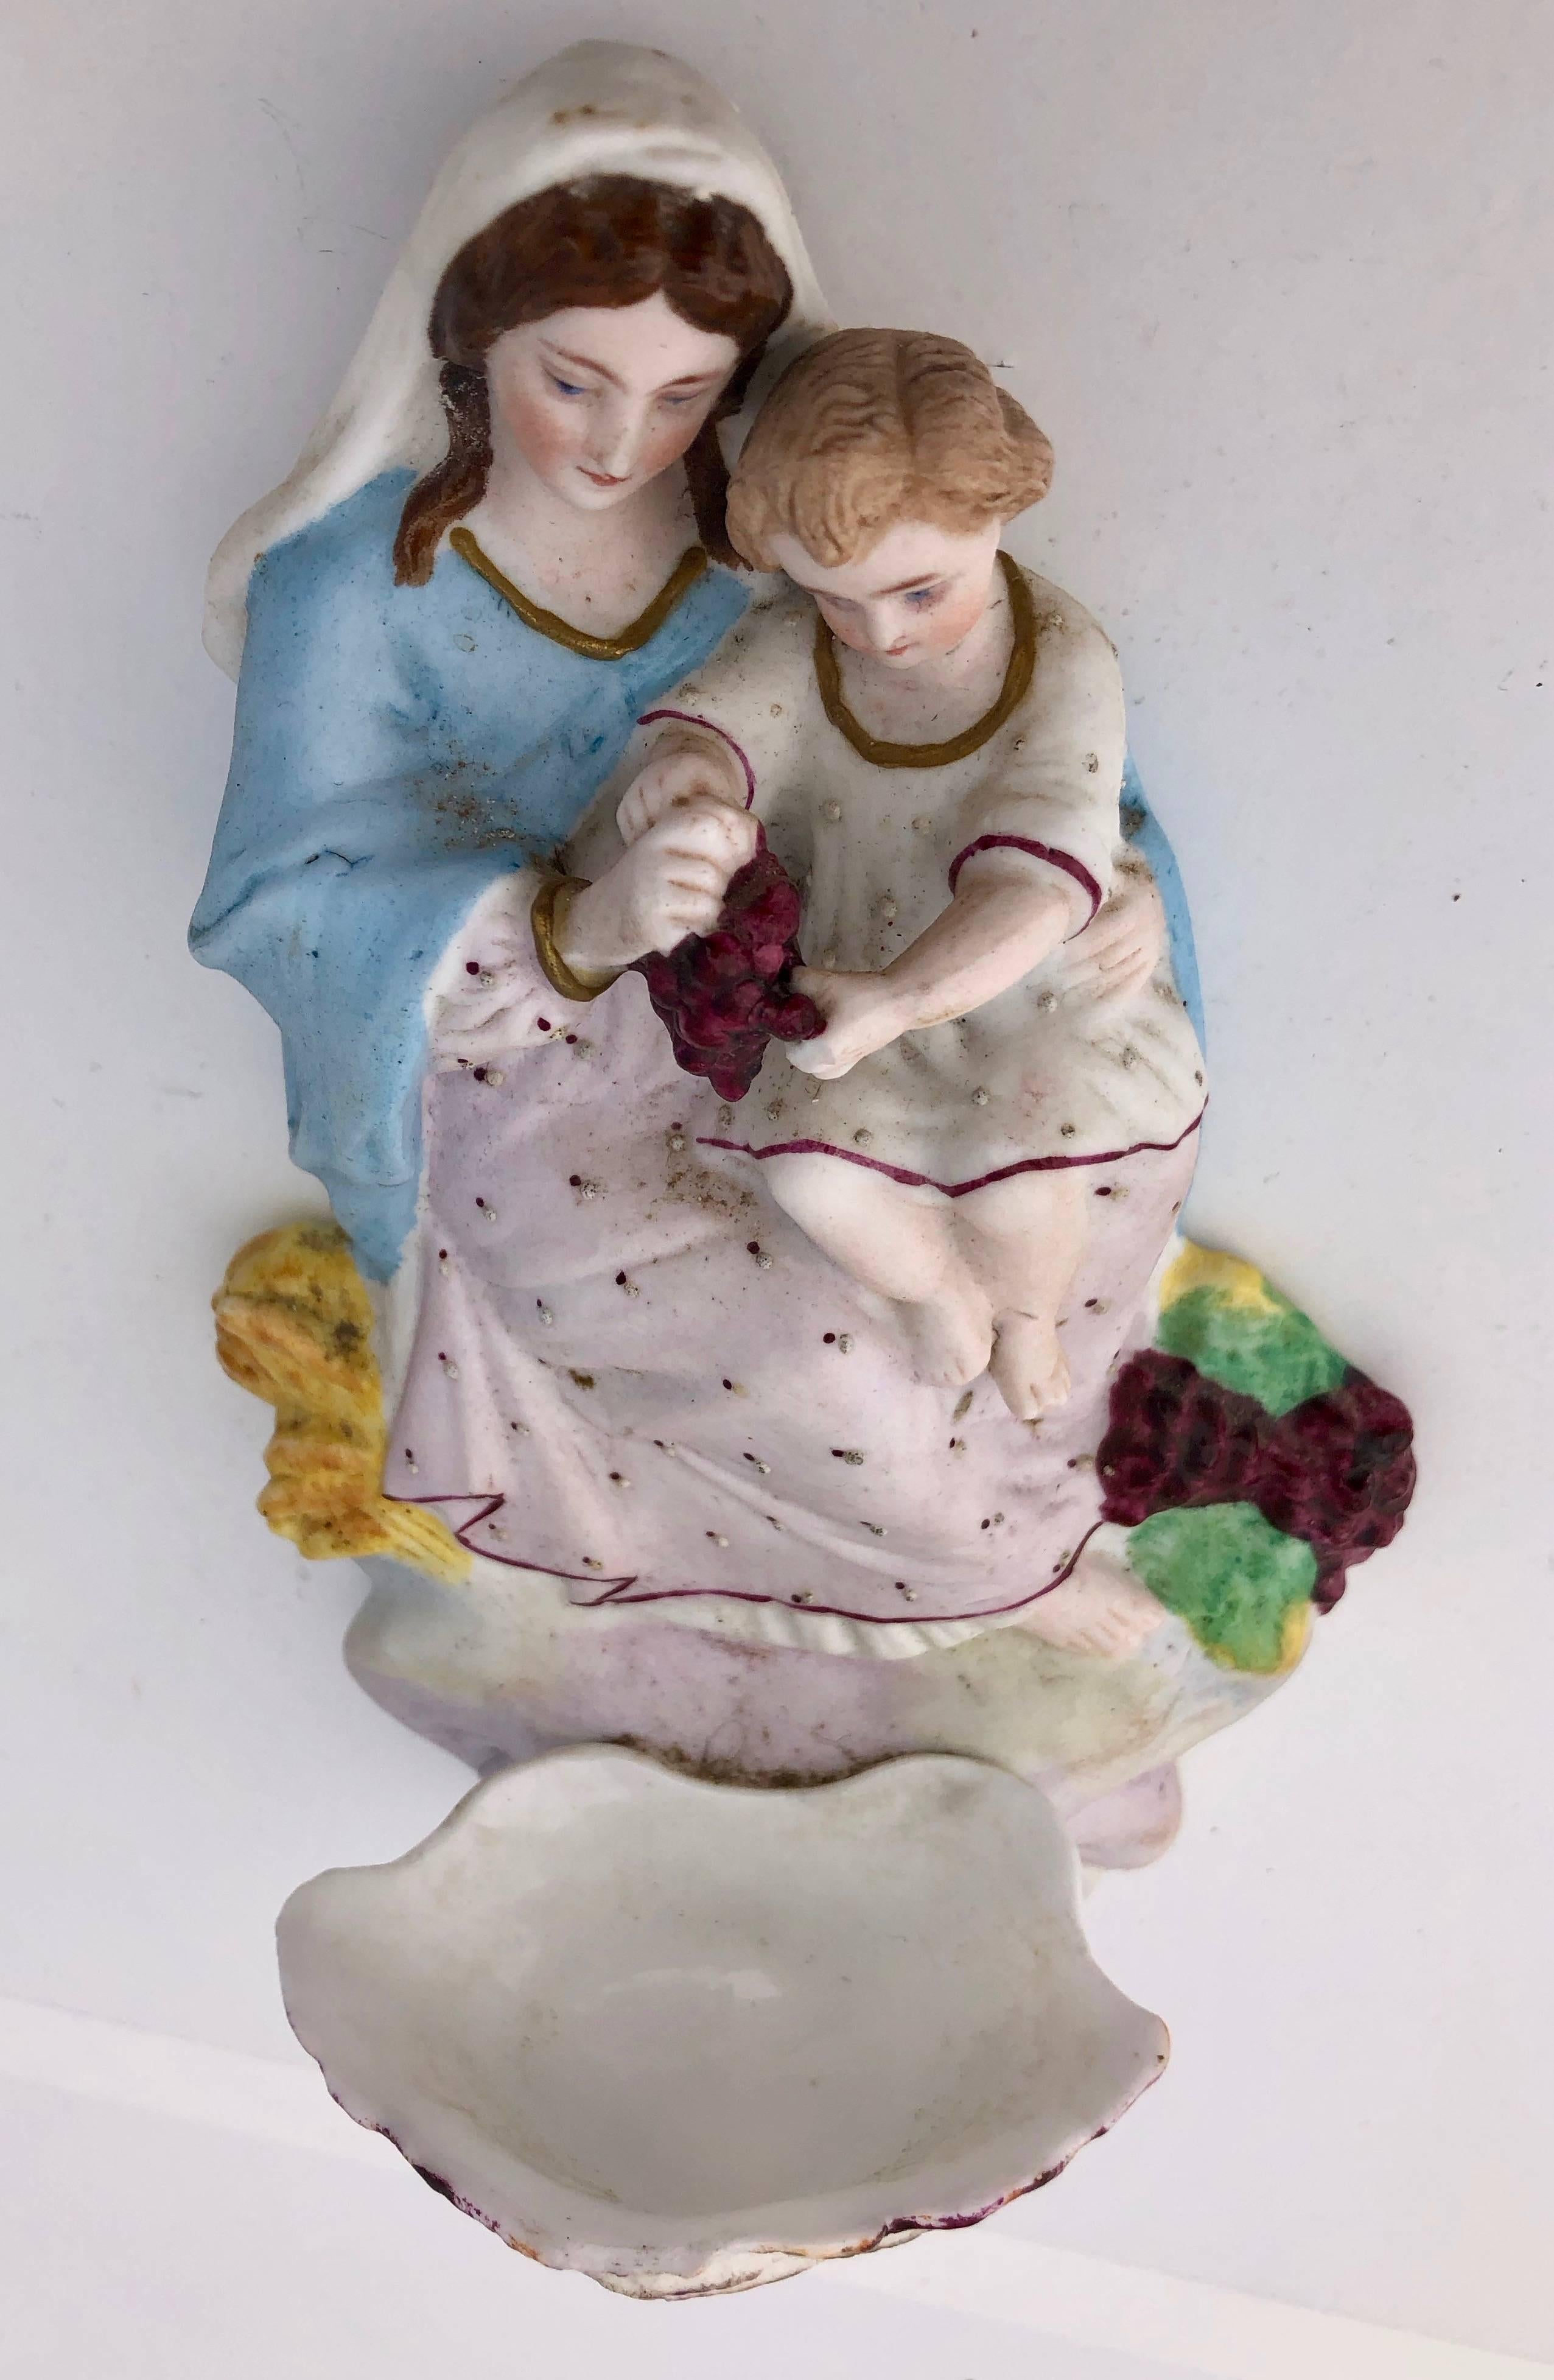 This stunning antique French faïence bénitier is hand-painted bisque in vibrant colors representing Mary and baby Jesus blessing red grapes with a font in the shape of a seashell. It is said in France that such a benetier is believed to offer grape